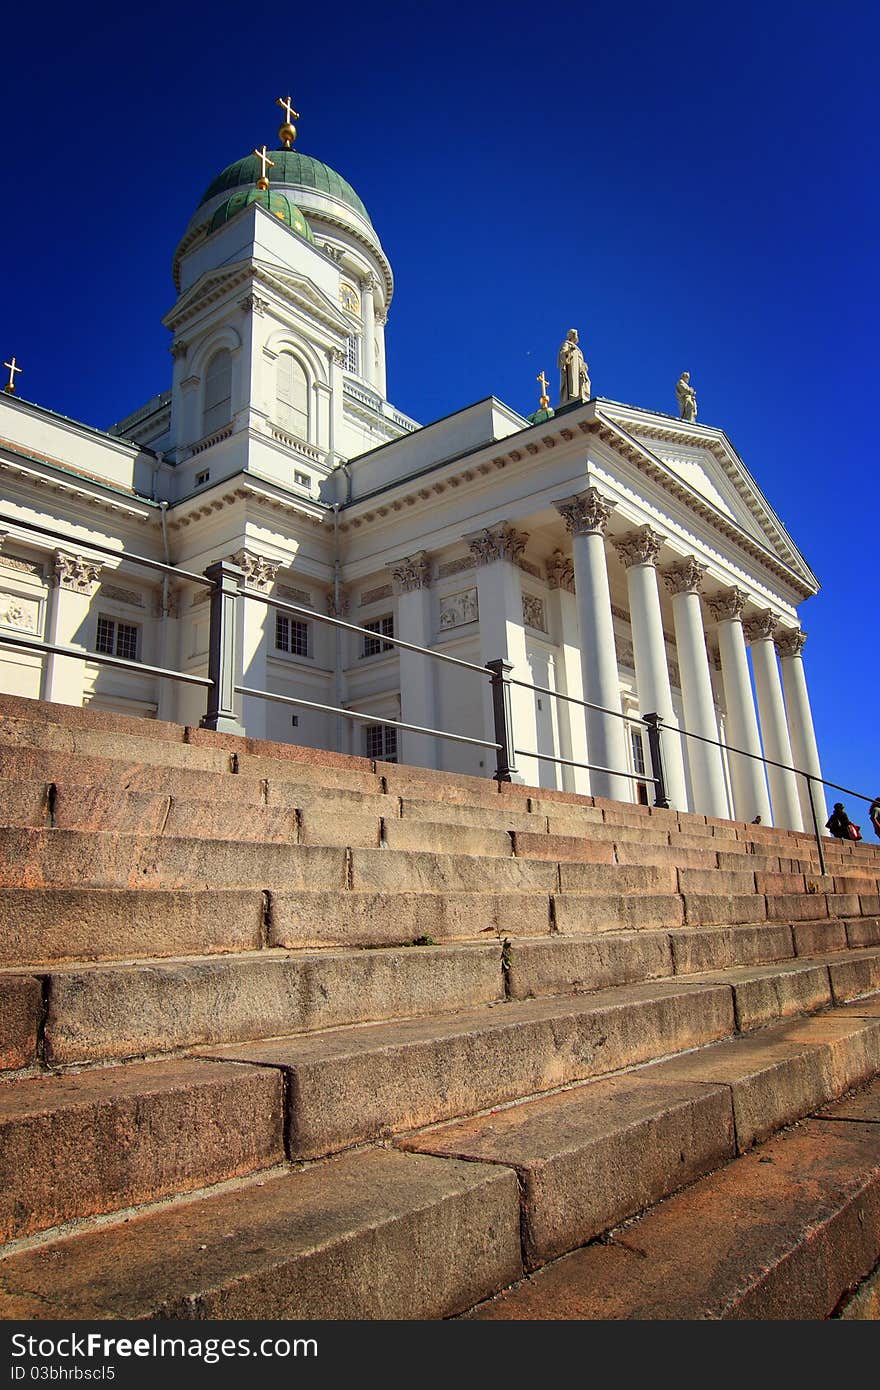 The Lutheran cathedral of Helsinki in the historical centre. The Lutheran cathedral of Helsinki in the historical centre.